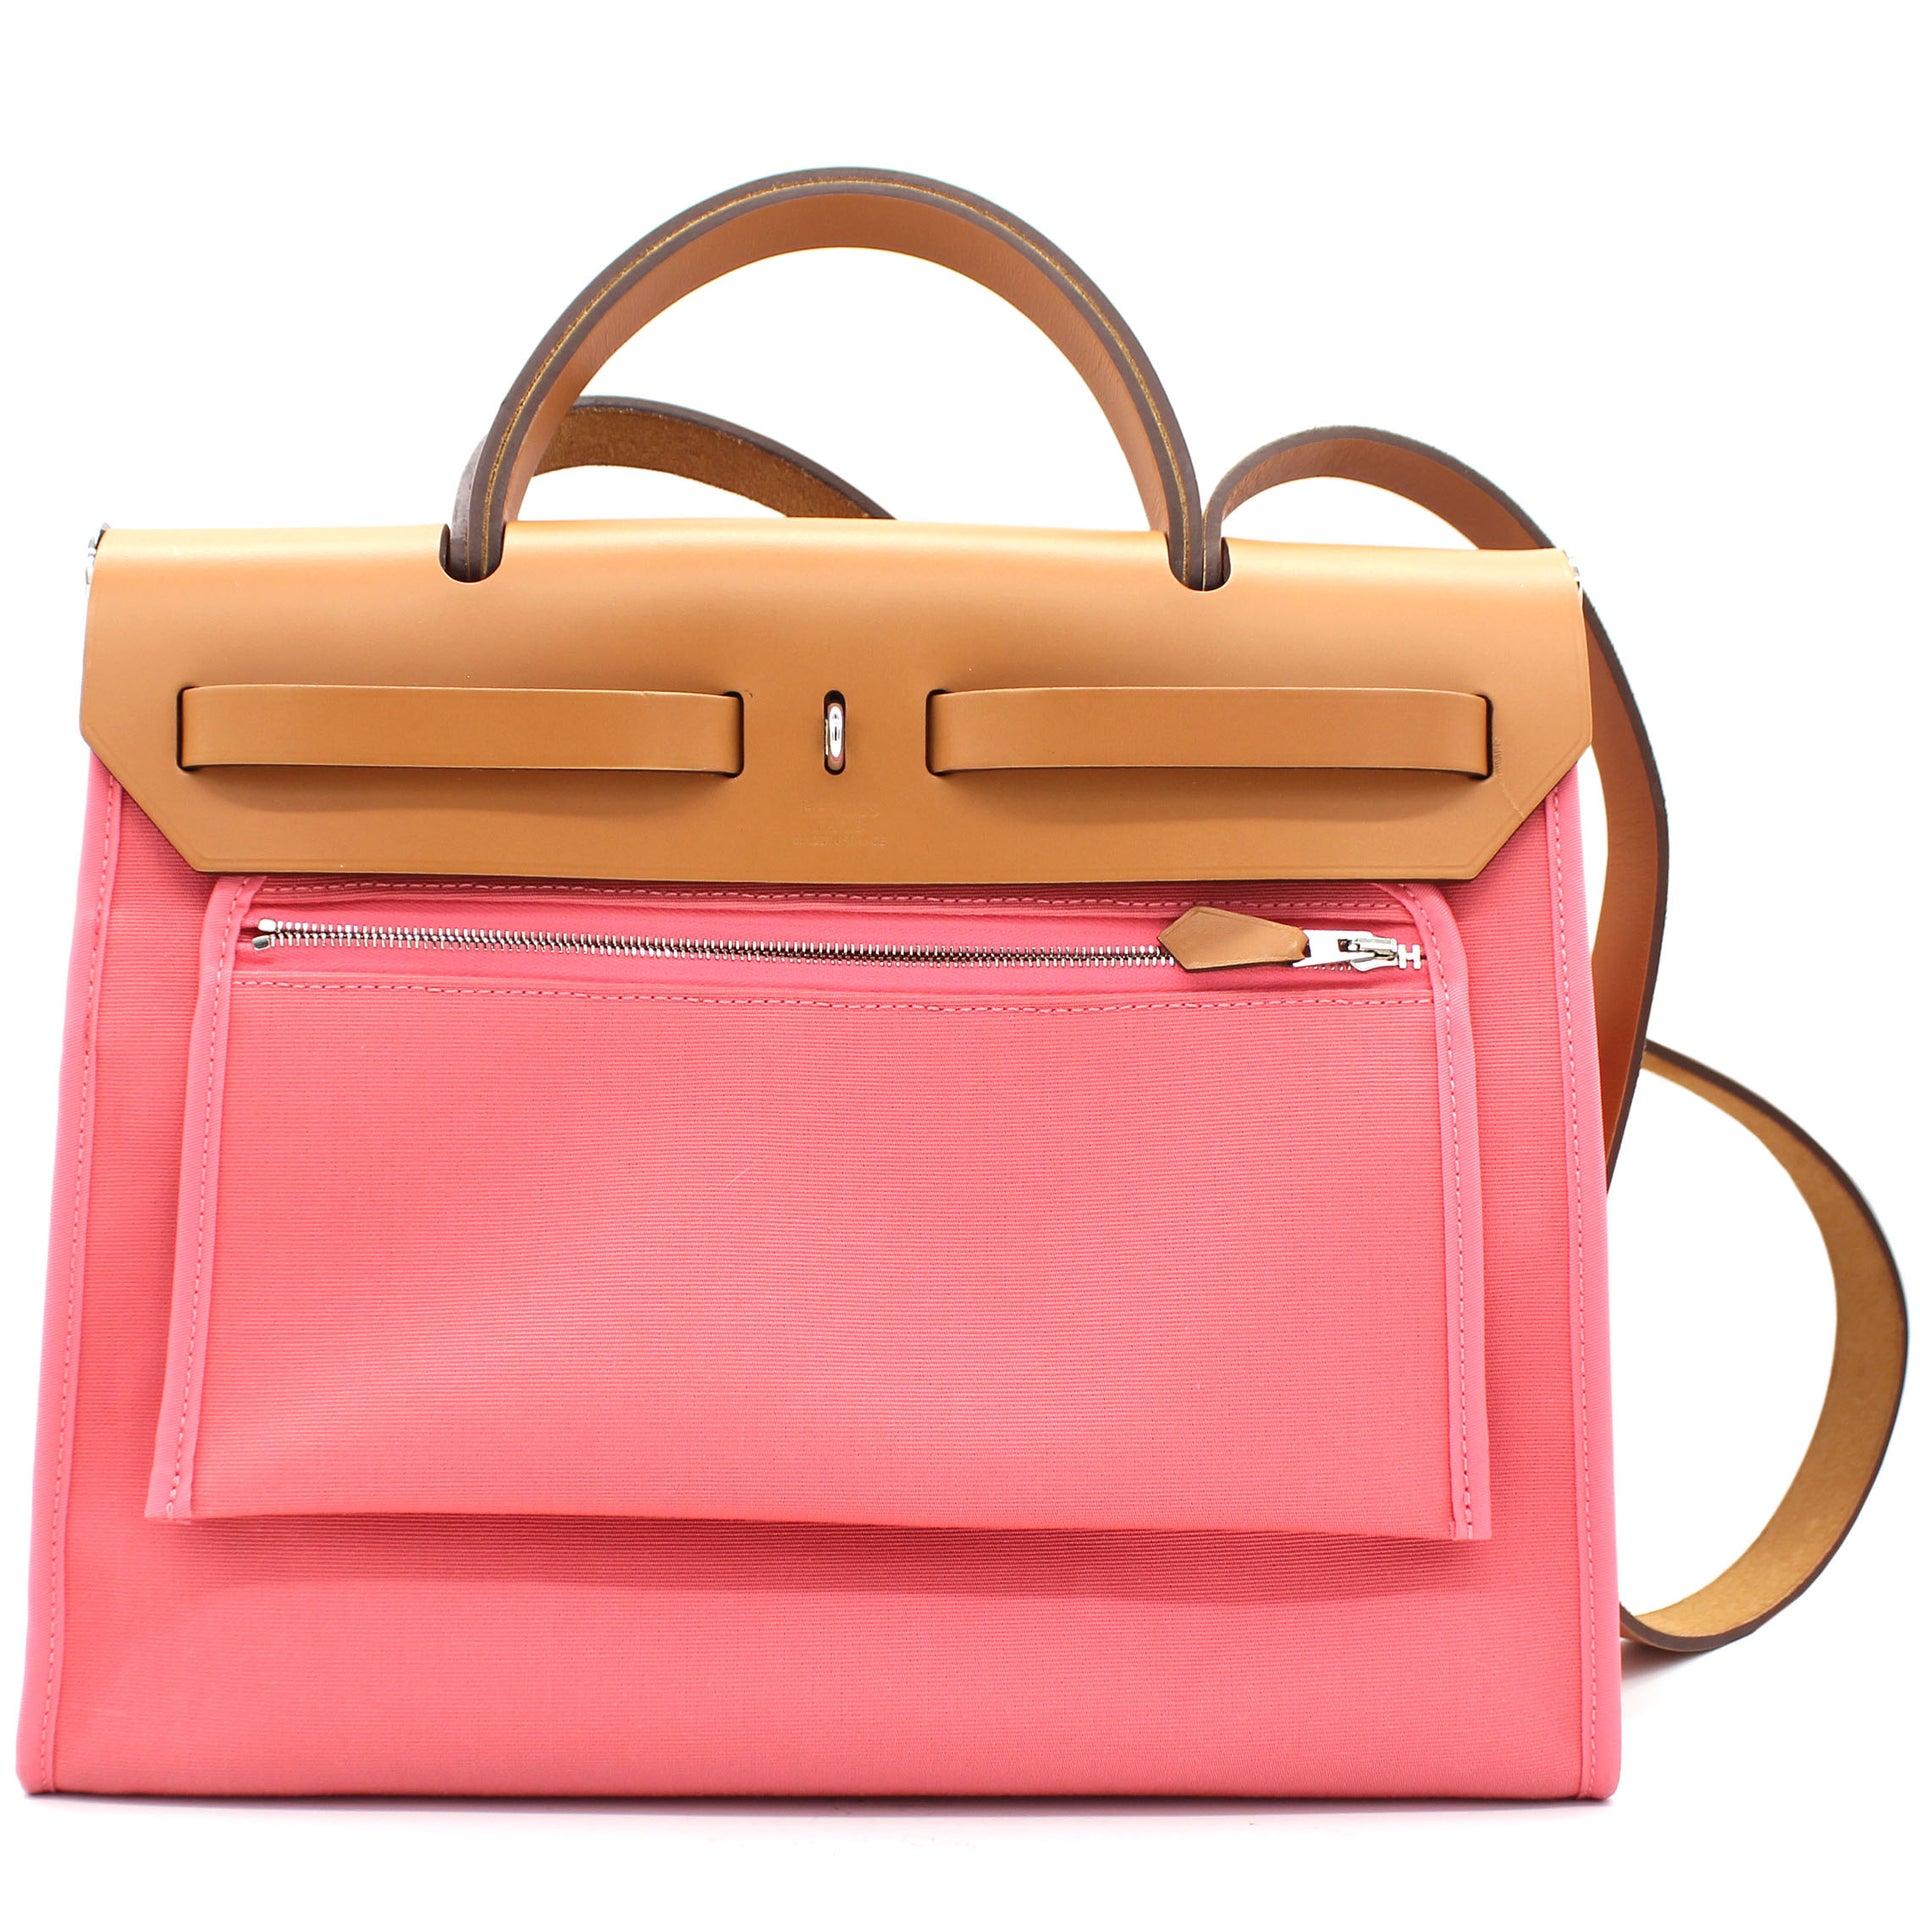 Belle & Homme - Hermes Herbag Rose Azalee in PM Condition: Brand